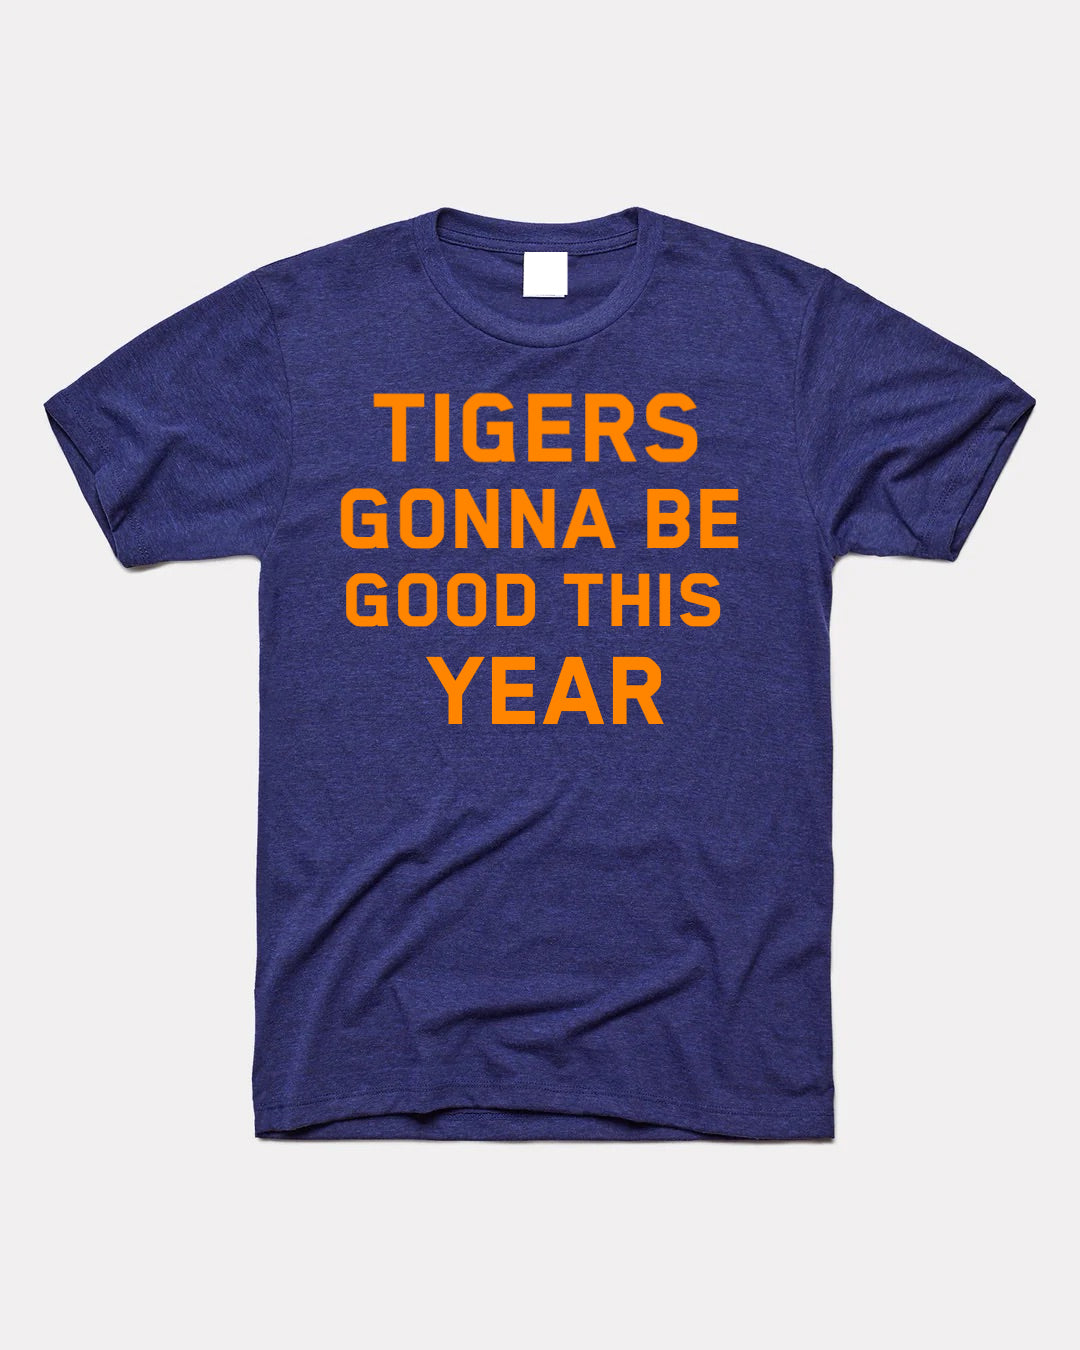 Tigers Gonna Be Good This Year